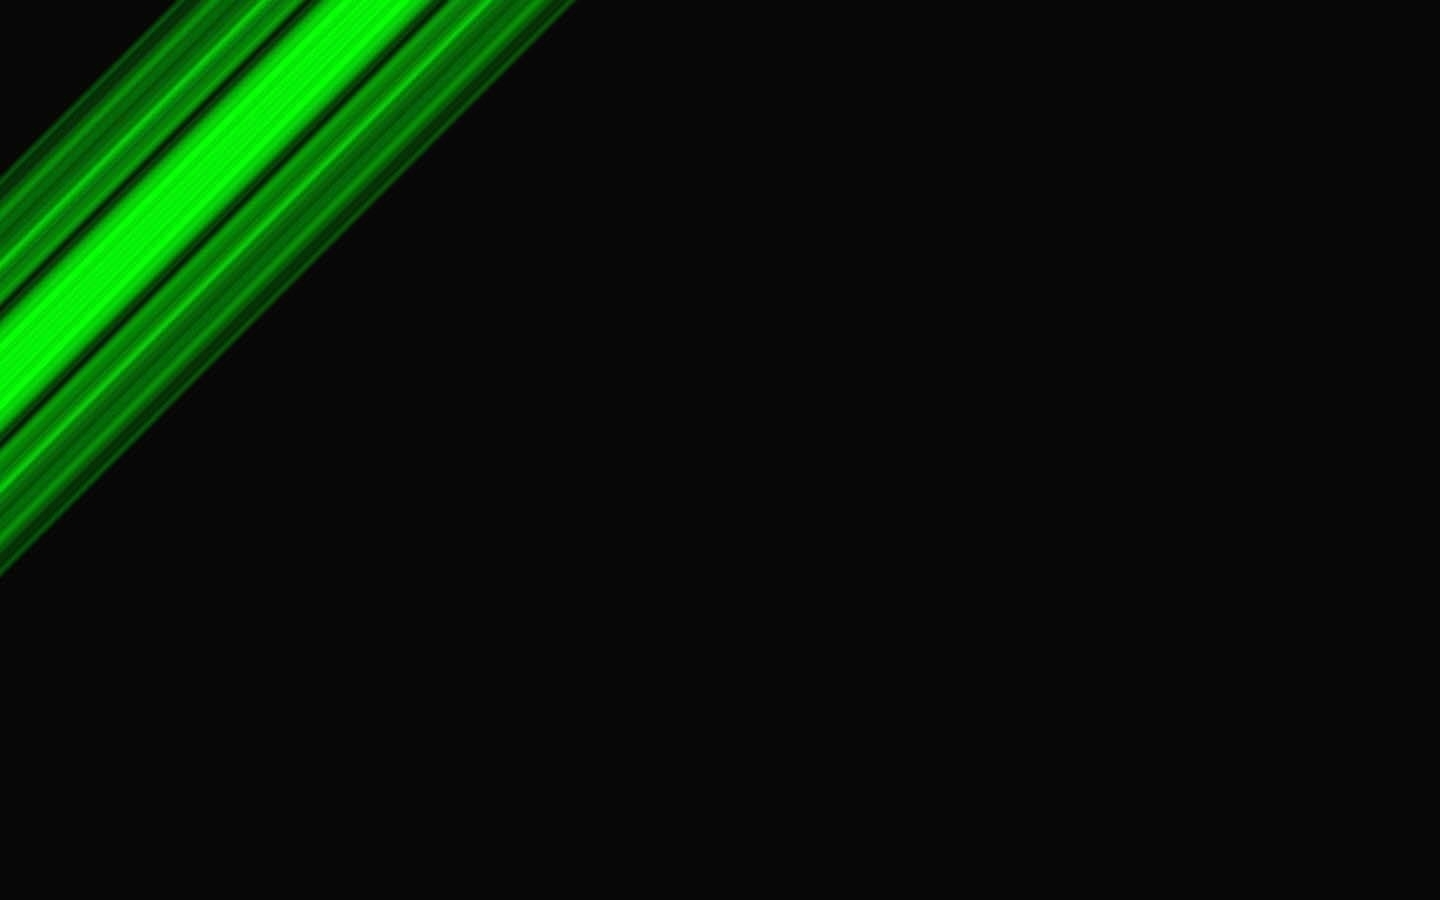 10 Best Black And Green Backgrounds FULL HD 1080p For PC Desktop